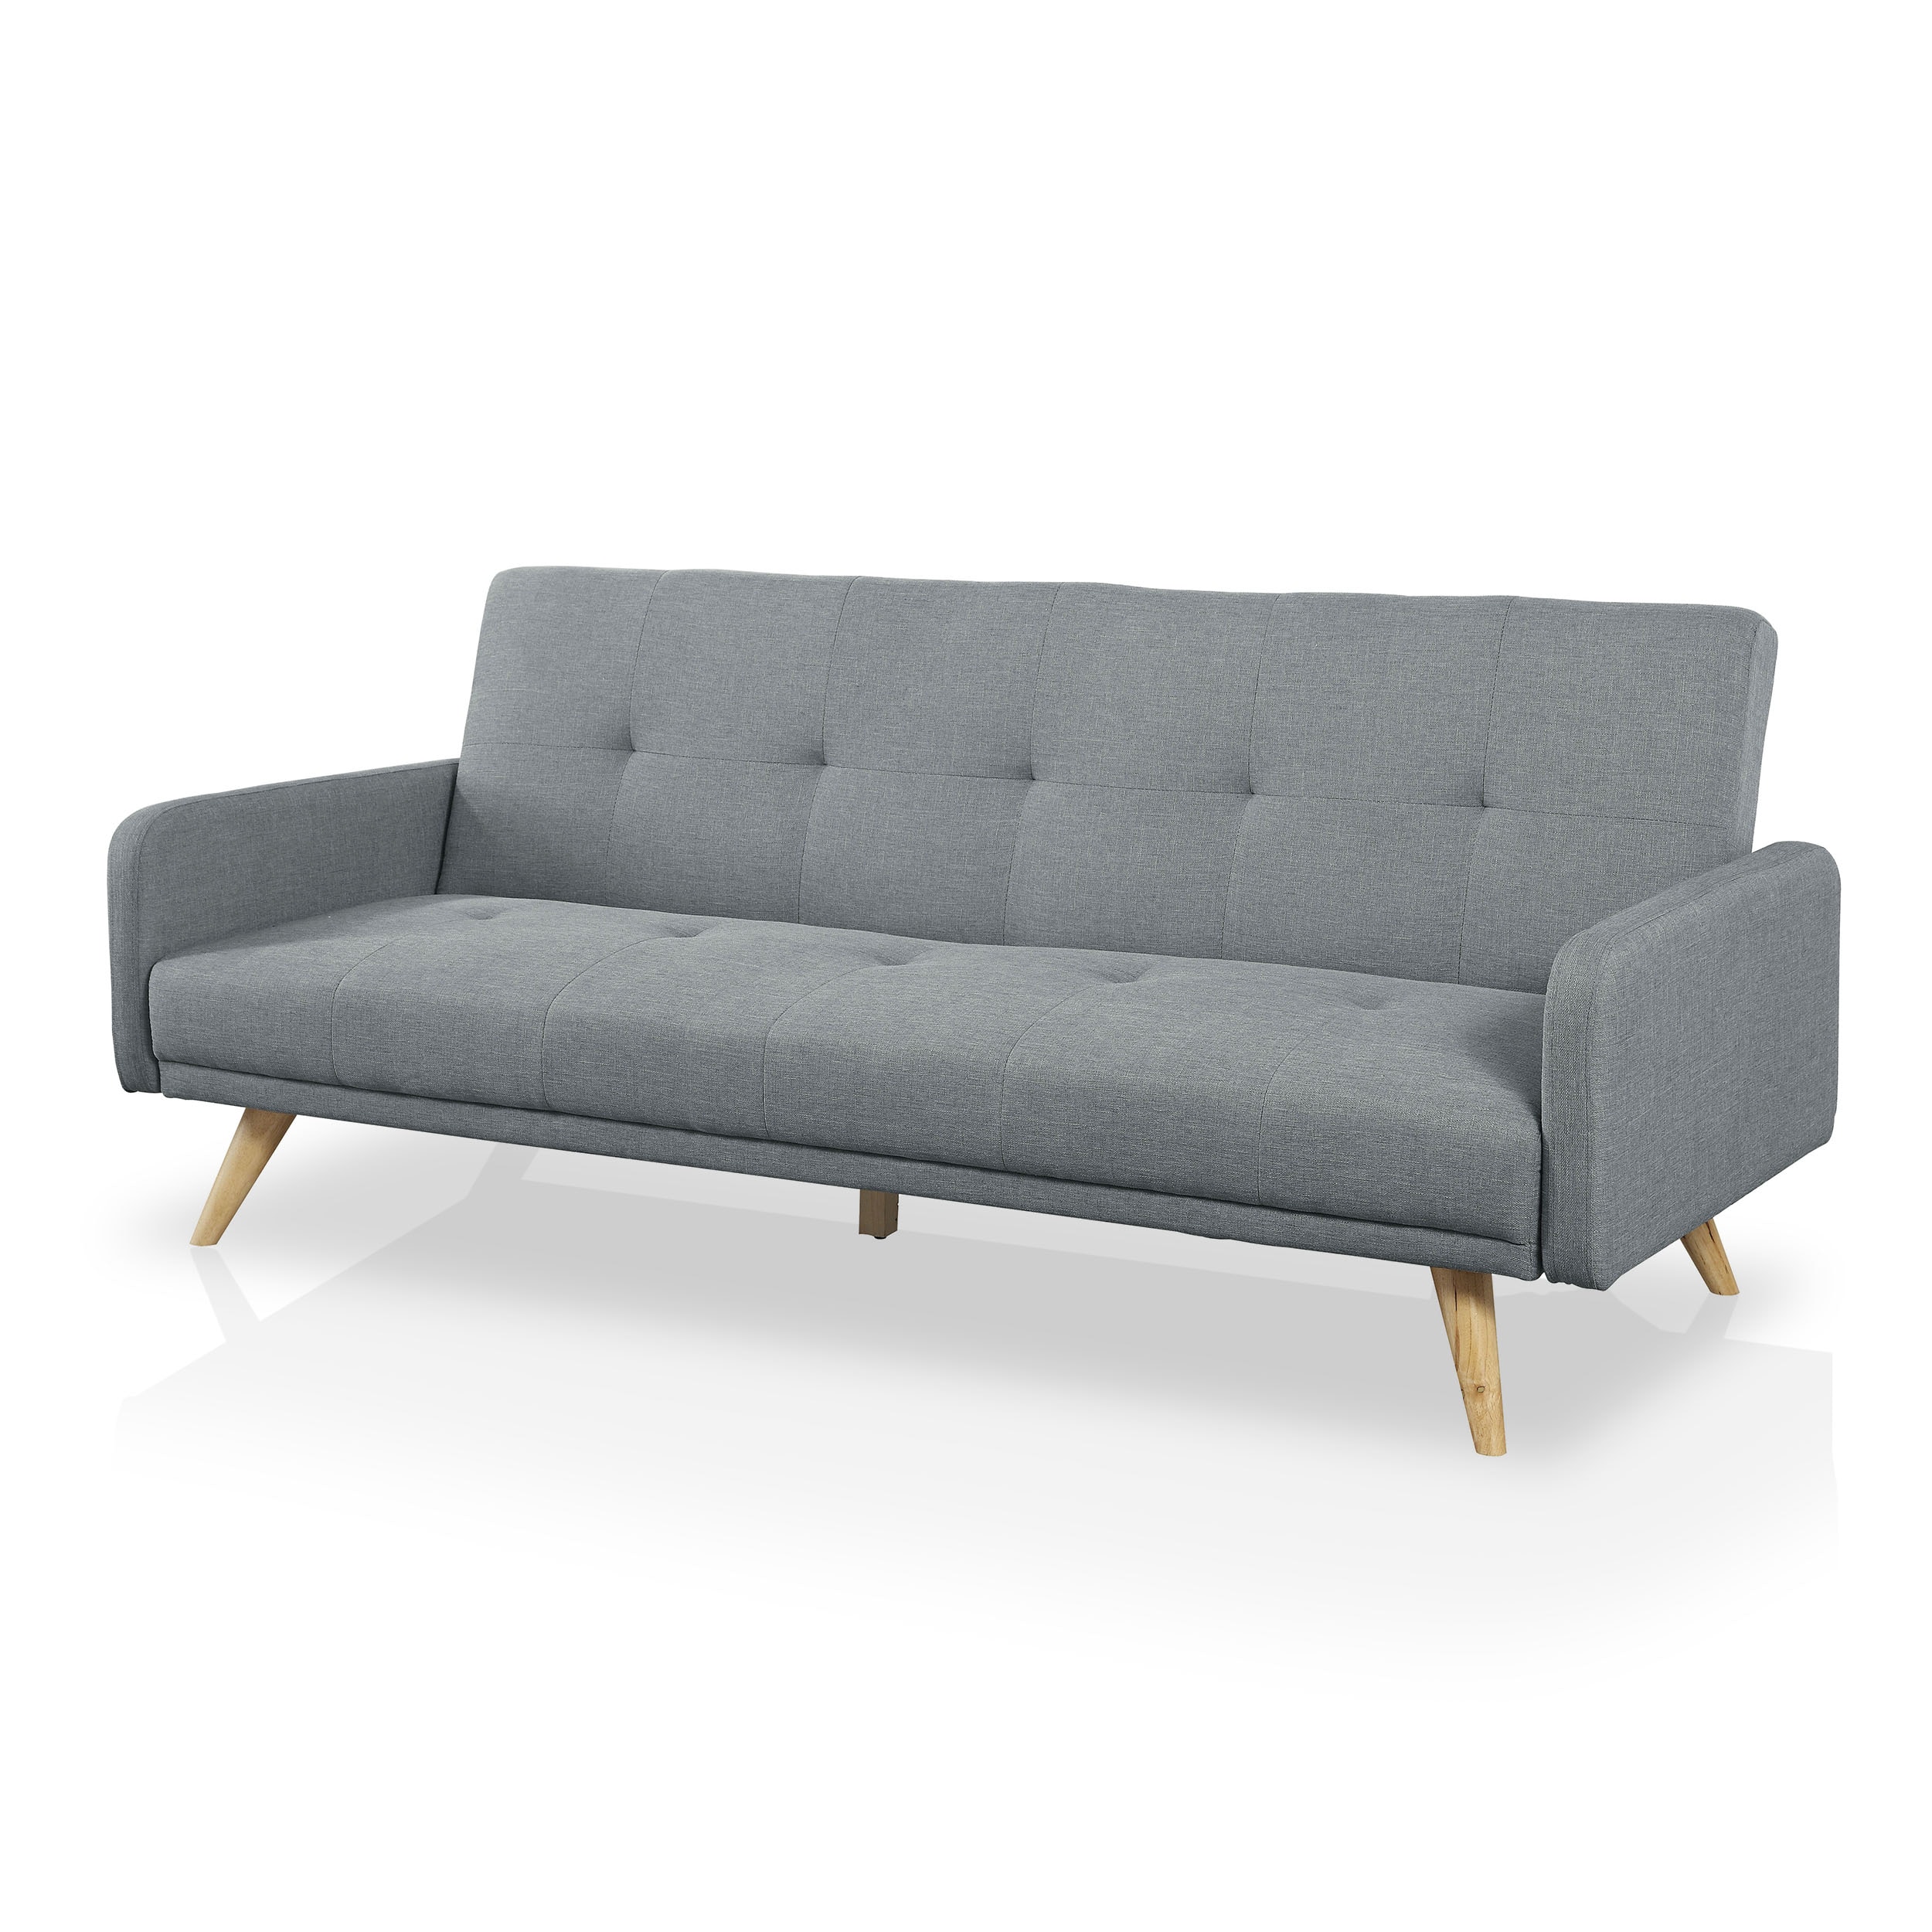 Vrijgevigheid Schiereiland Word gek Furniture of America Palatine Gray Contemporary/Modern Polyester Futon in  the Futons & Sofa Beds department at Lowes.com